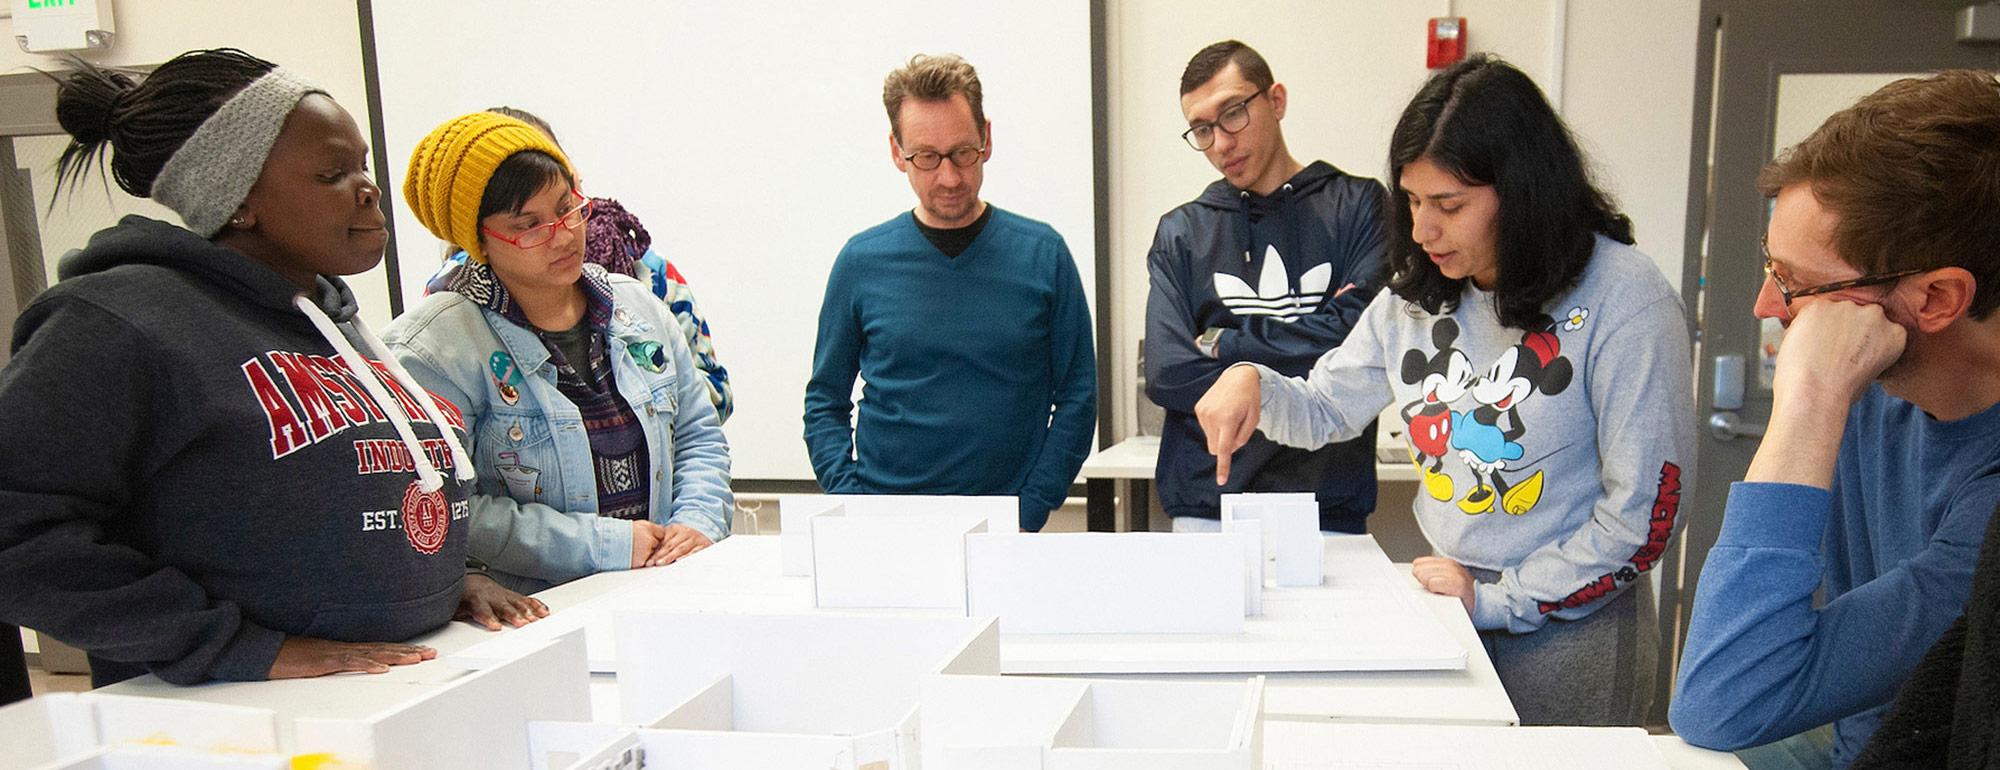 transfer students standing around a model of a building in a design class